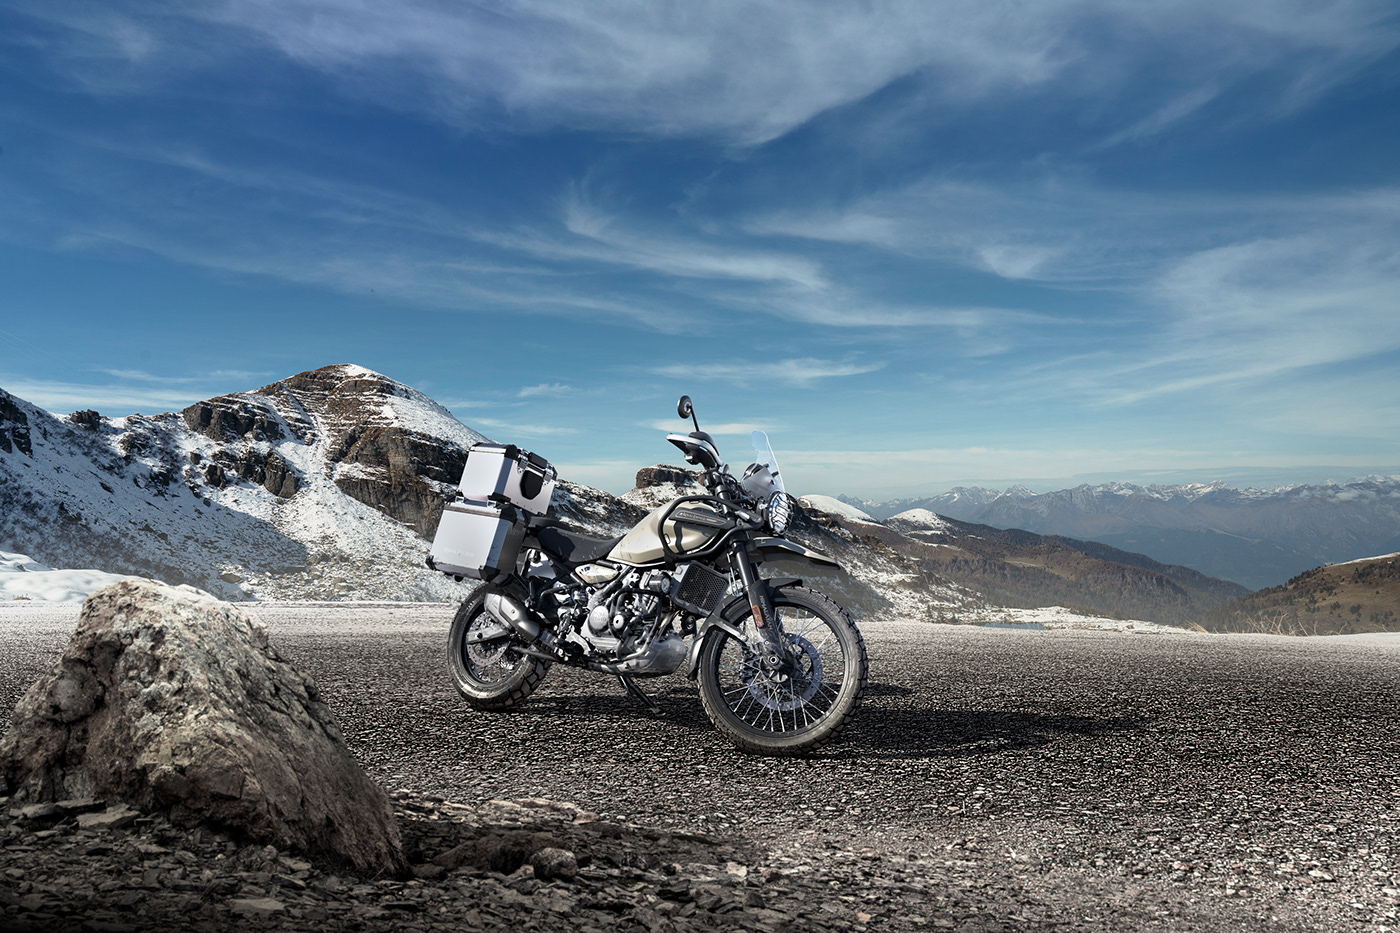 3D CGI 3ds max Render automotive   Digital Art  royal enfield Photography  retouch vray